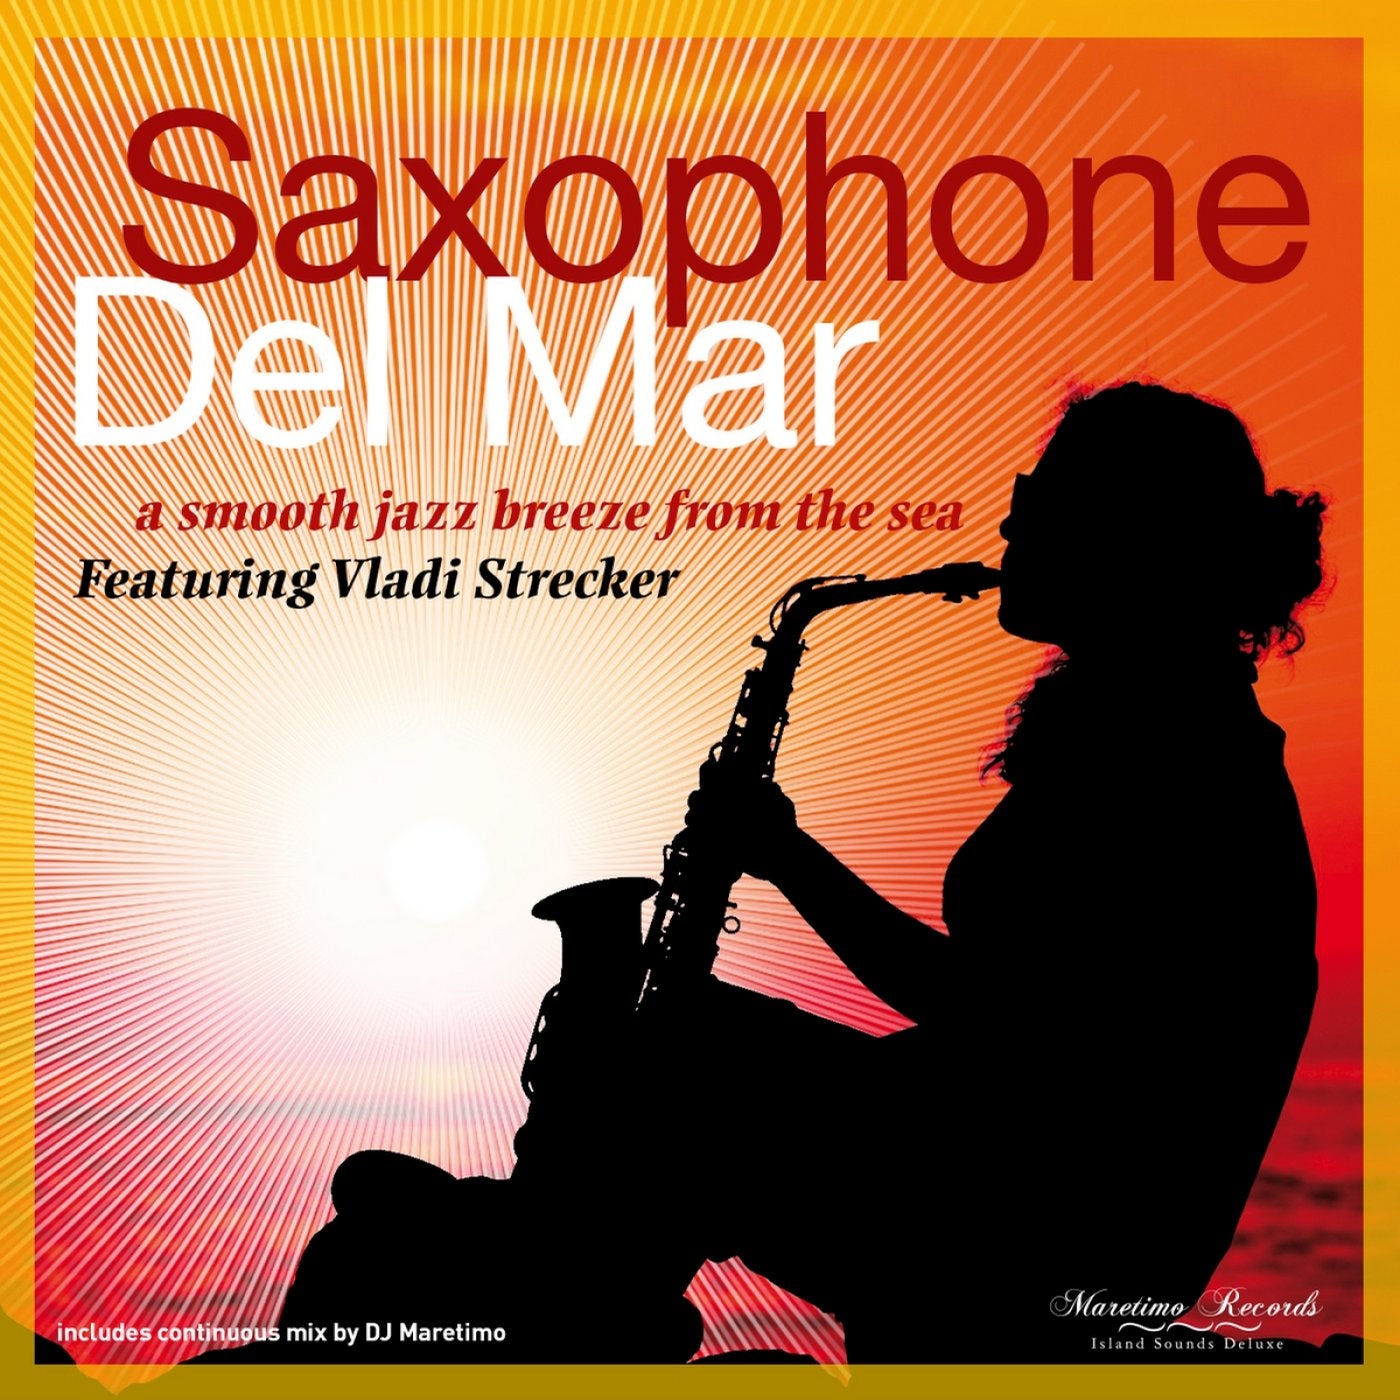 Saxophone Del Mar - A Smooth Jazz Breeze from the Sea